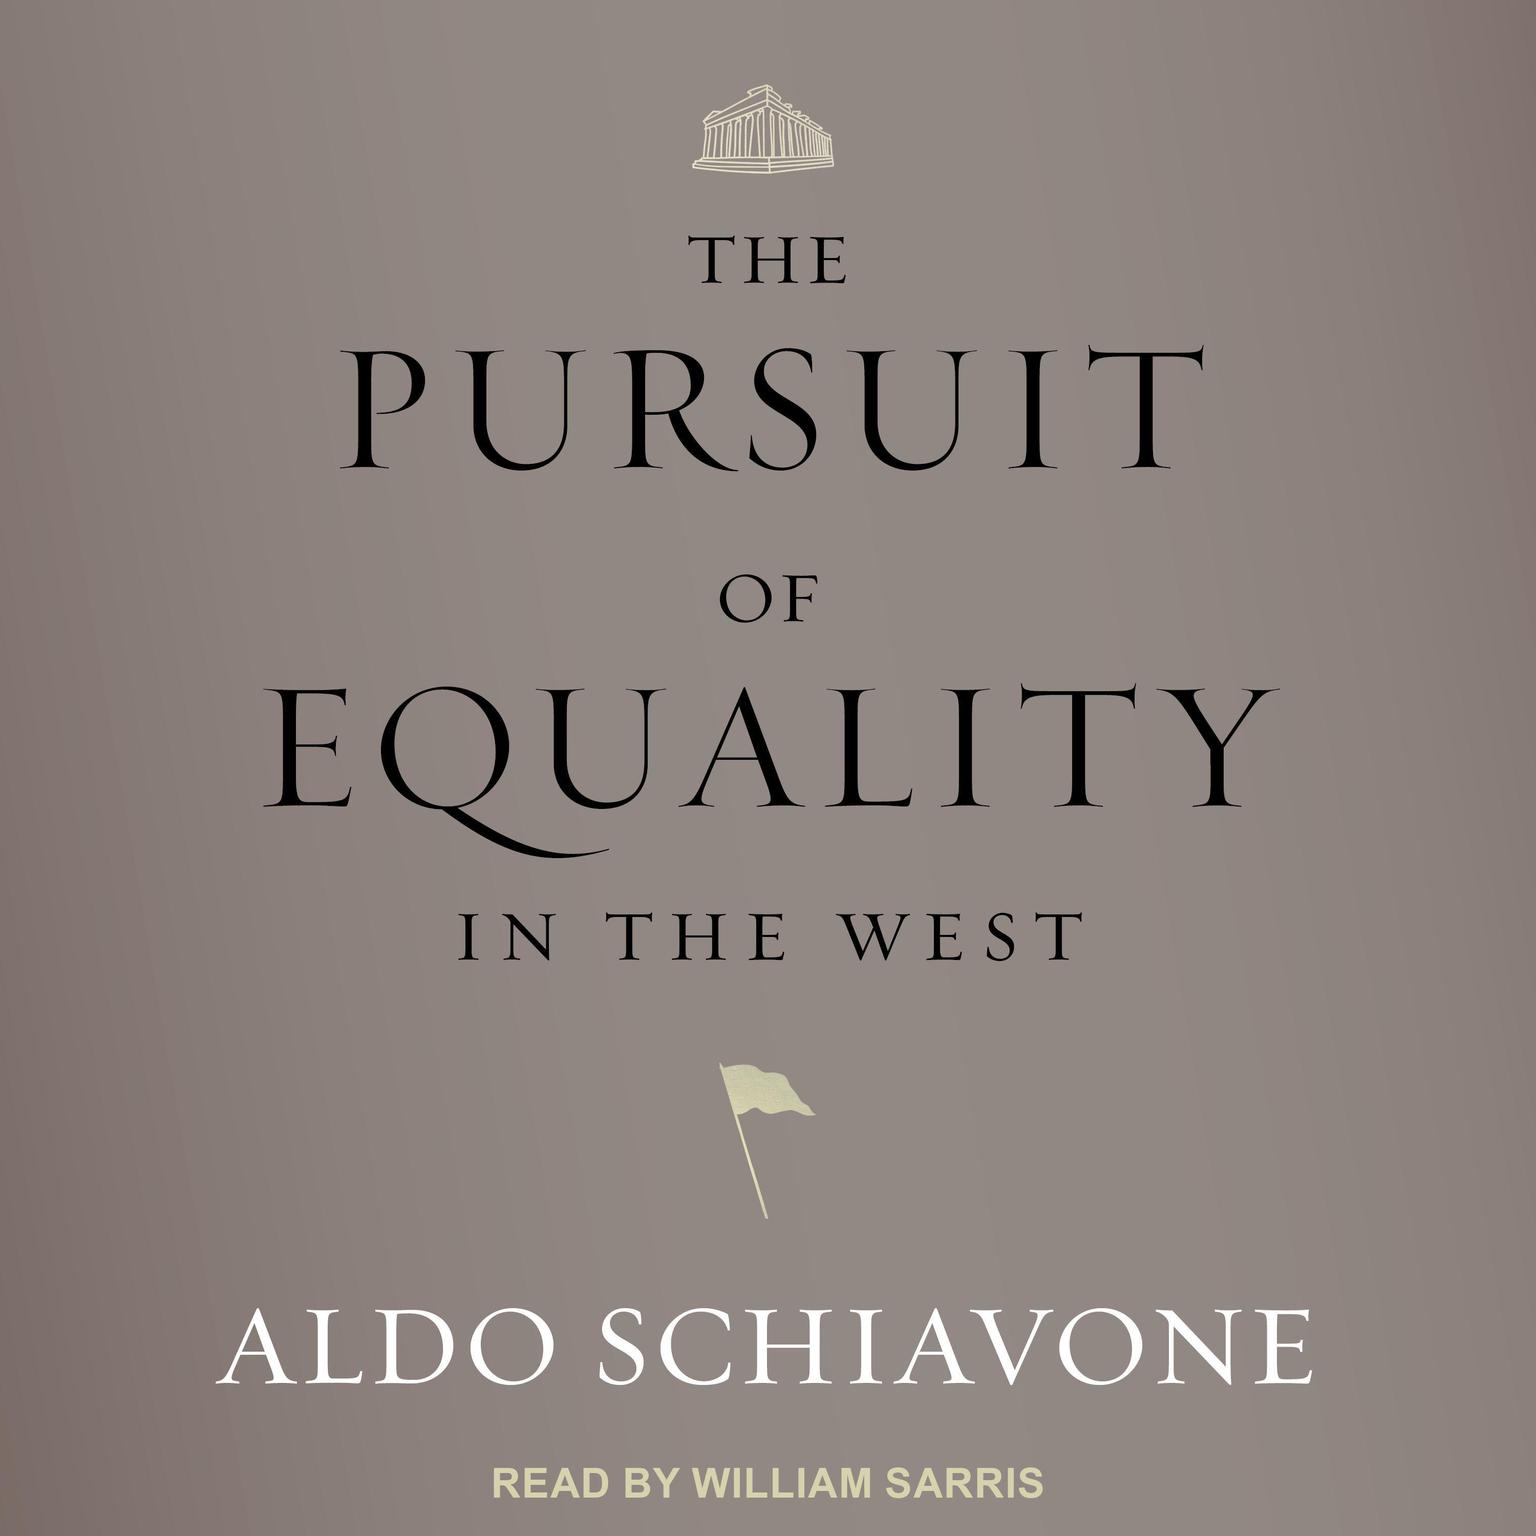 The Pursuit of Equality in the West Audiobook, by Aldo Schiavone